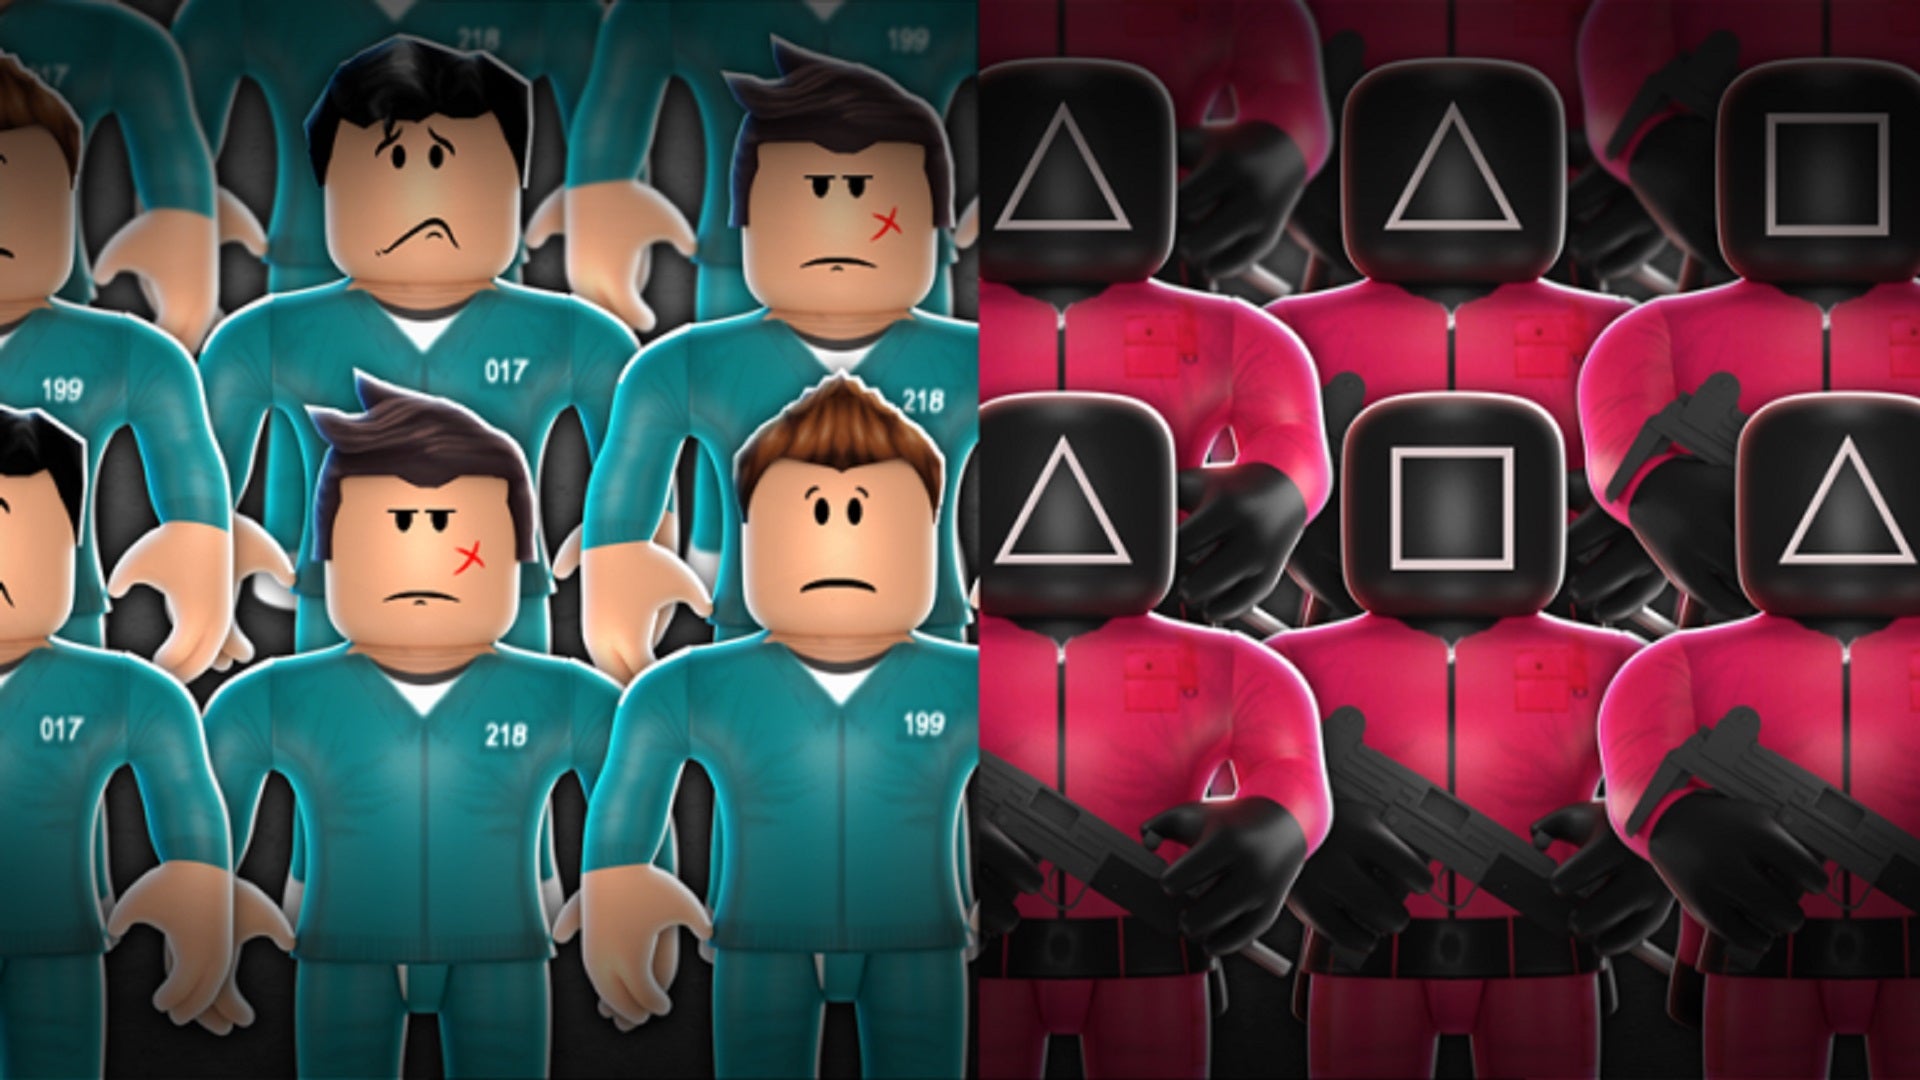 Two groups of Roblox characters stand in rows, dressed respectively as players and guards from the TV series Squid Game.